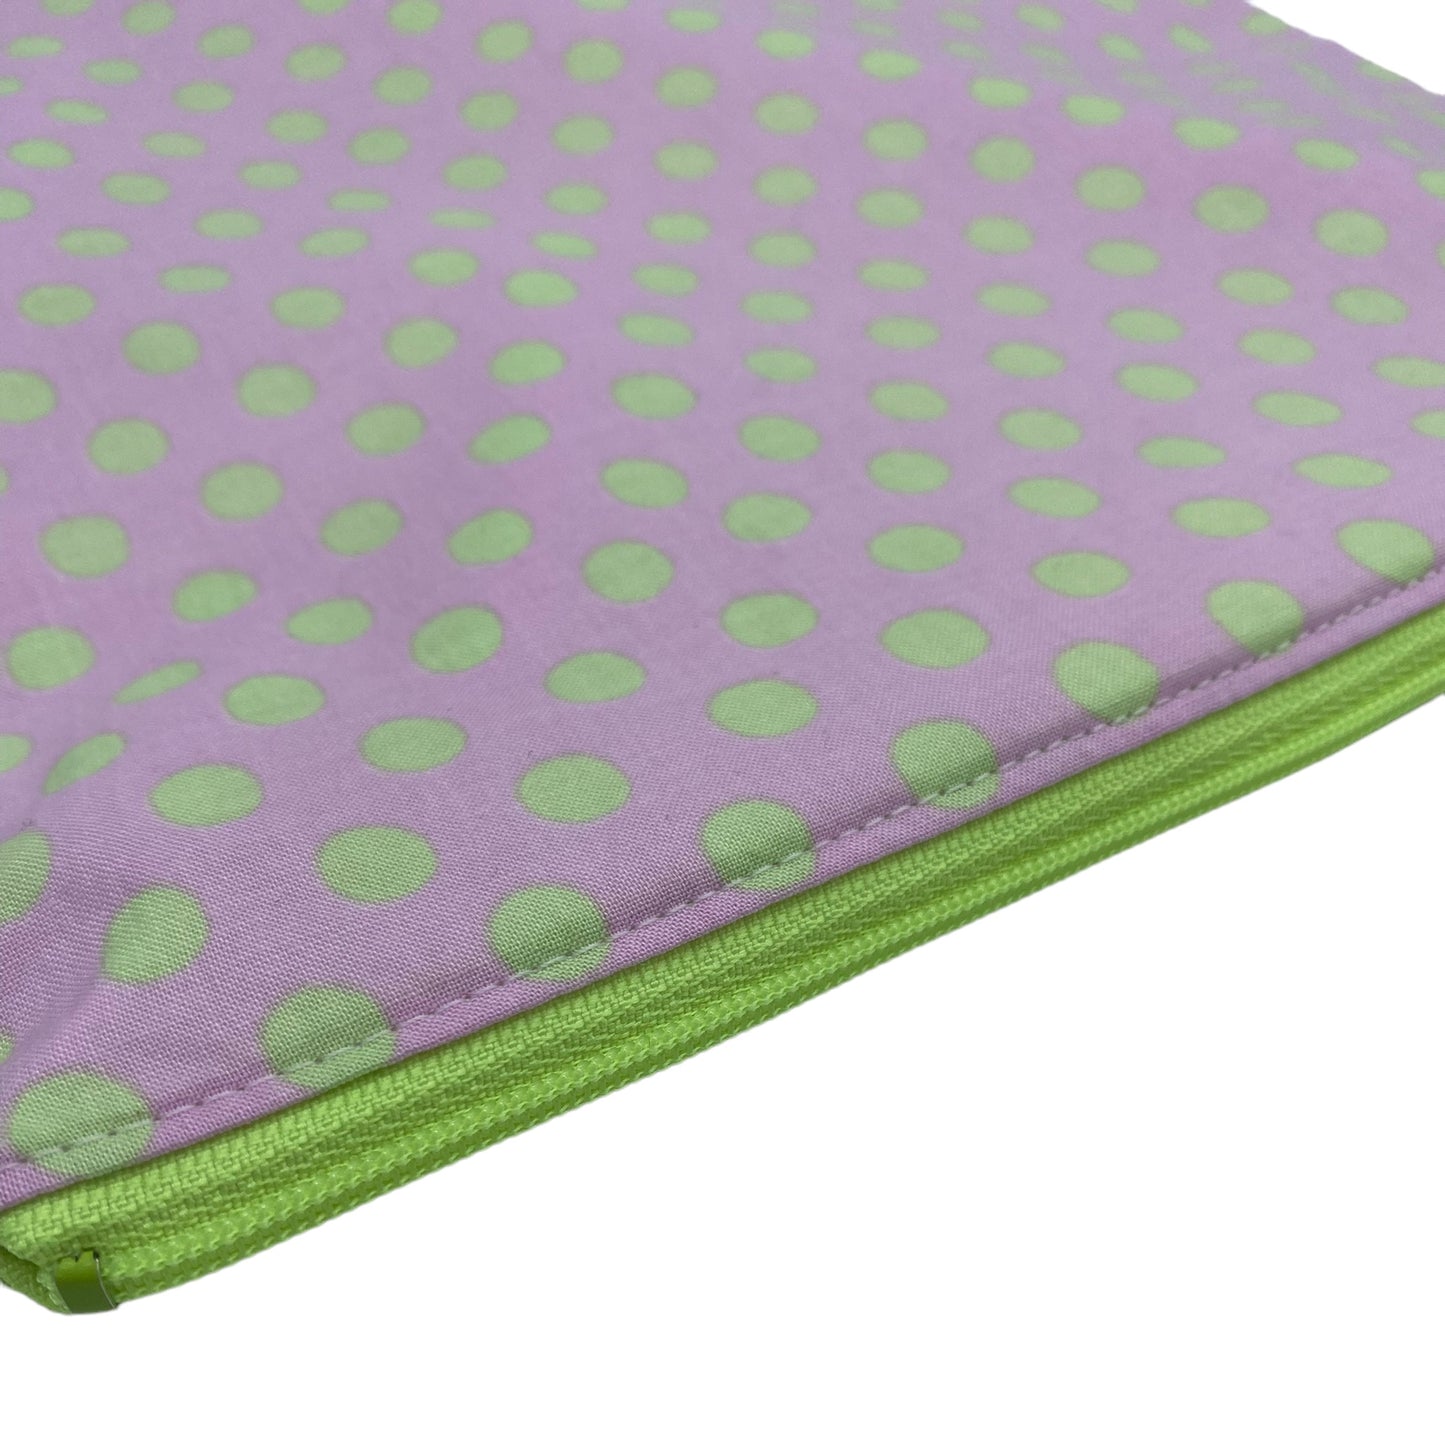 Gallon Sized Reusable Zippered Bag Dots Green On Pink